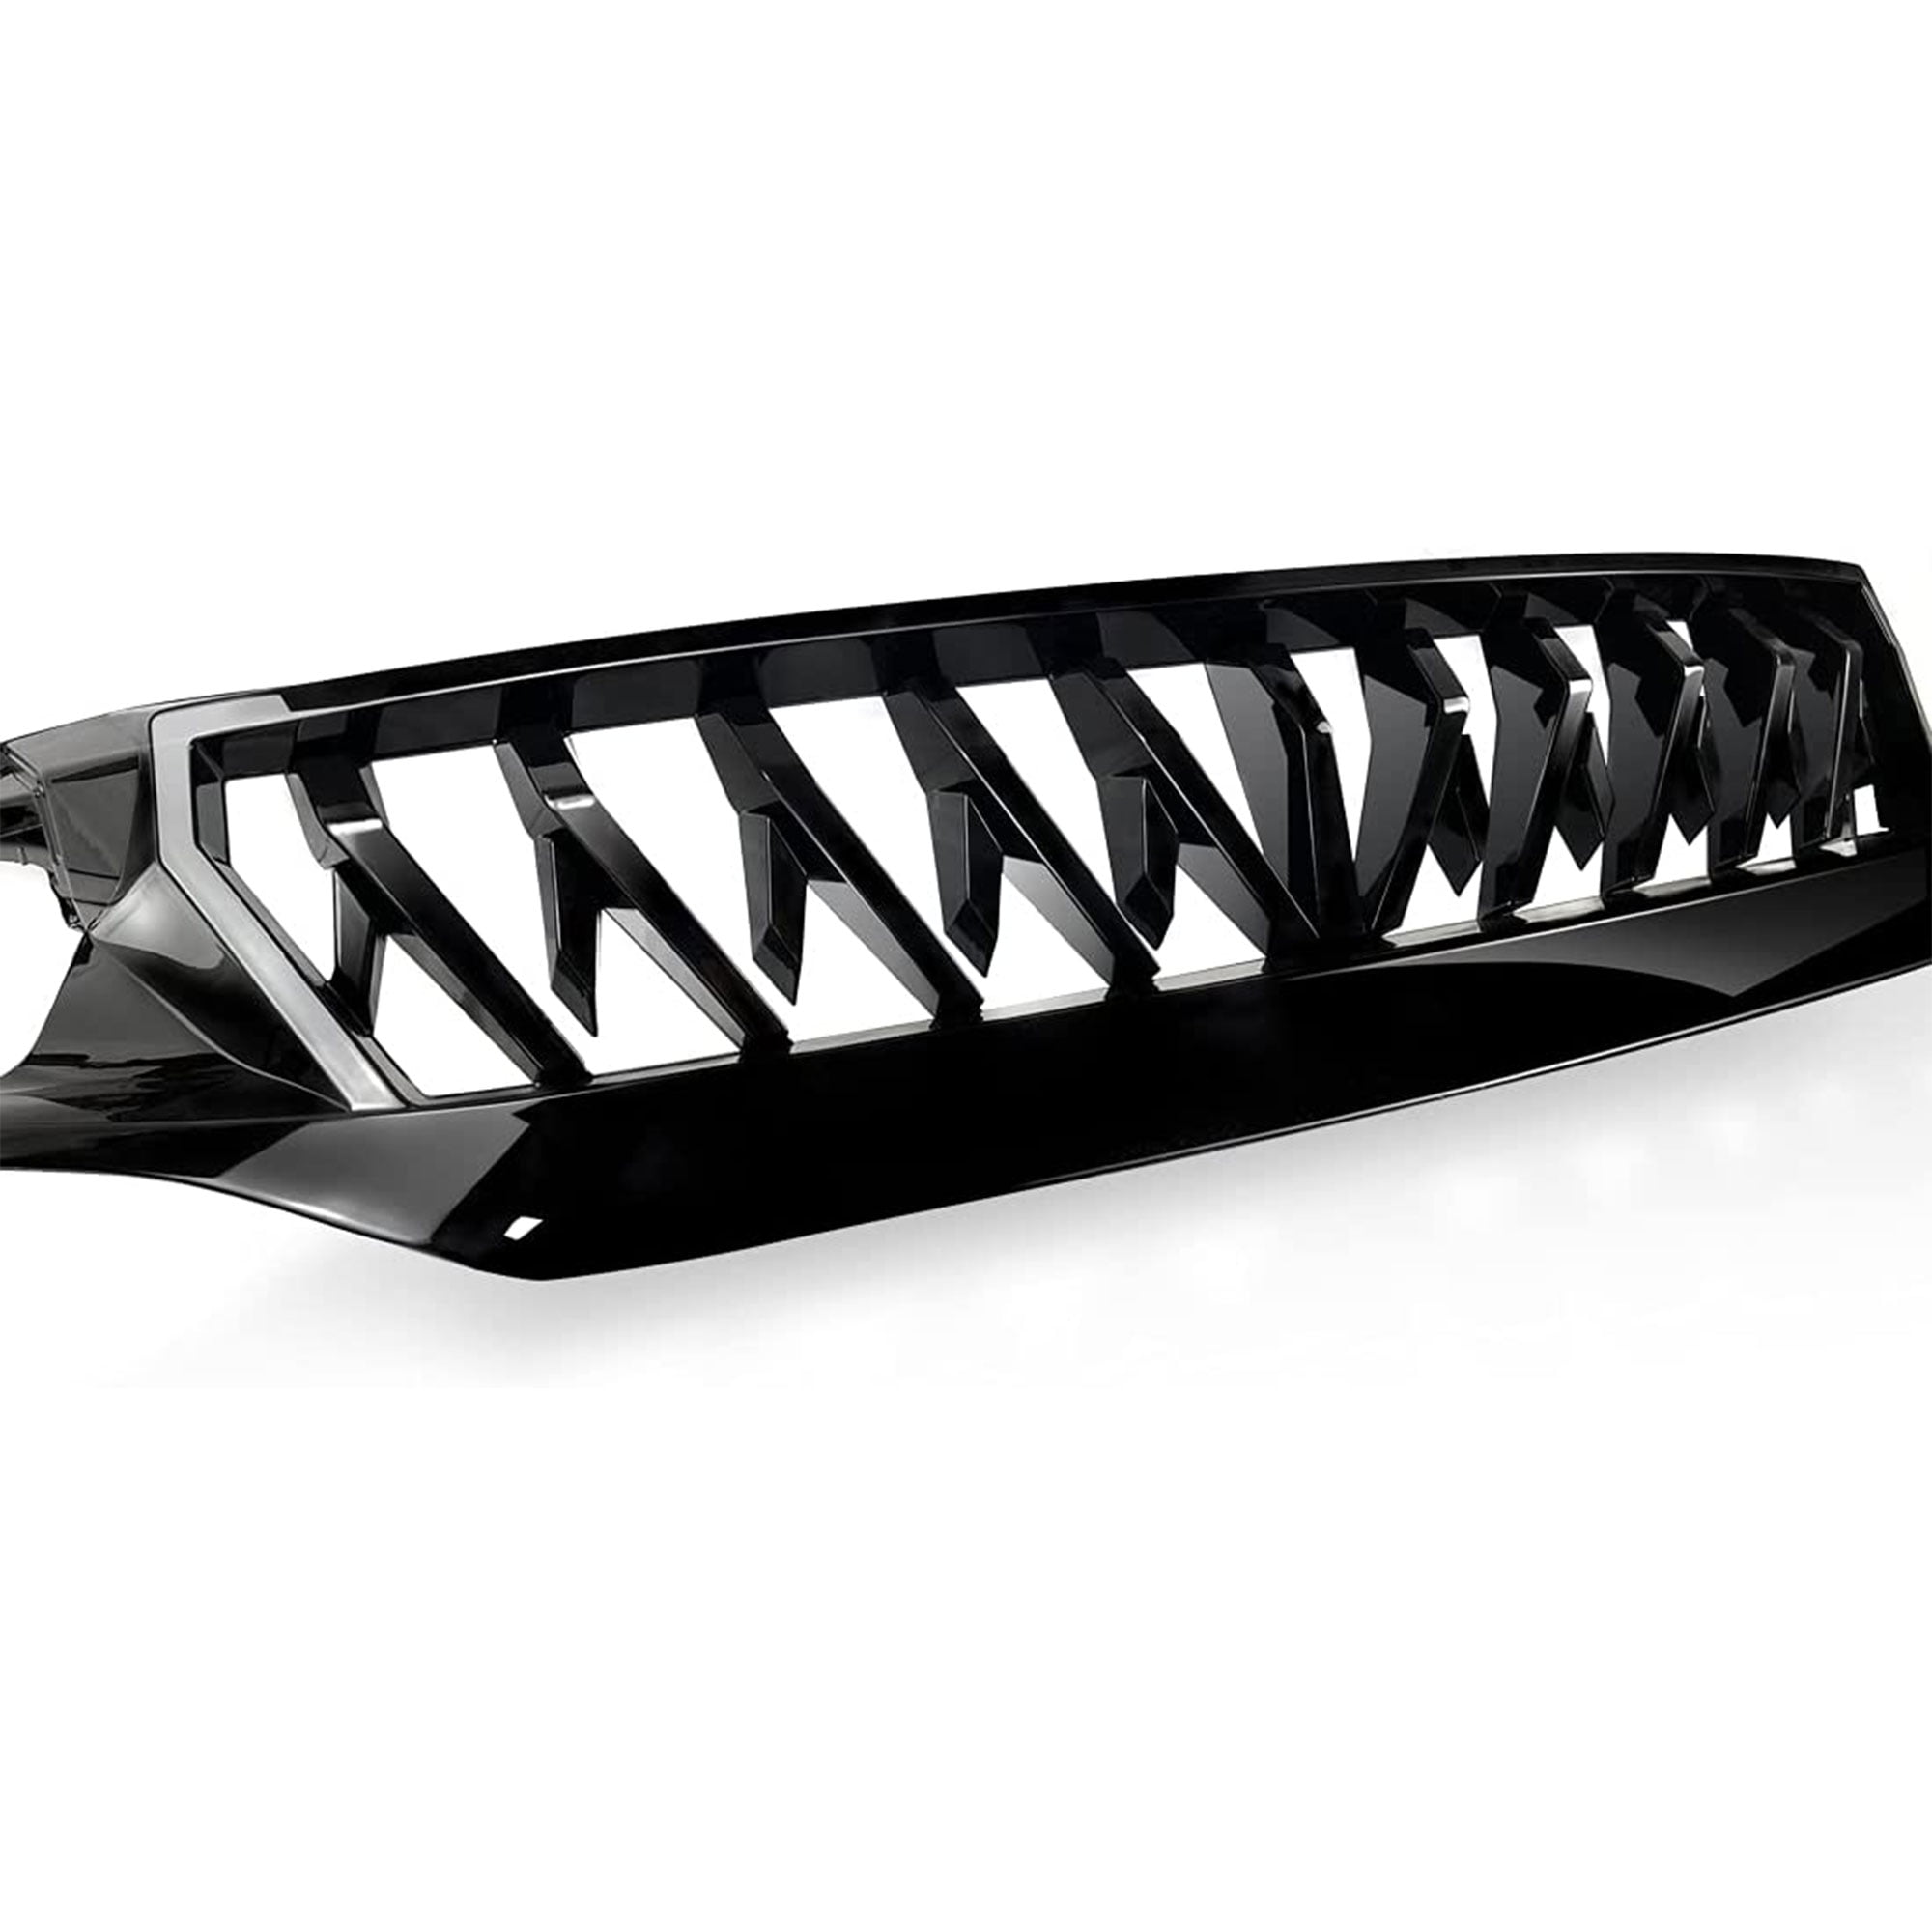 AMERICAN MODIFIED Front Shark Grille Compatible with 2016-2021 Honda Civic Glossy Black 